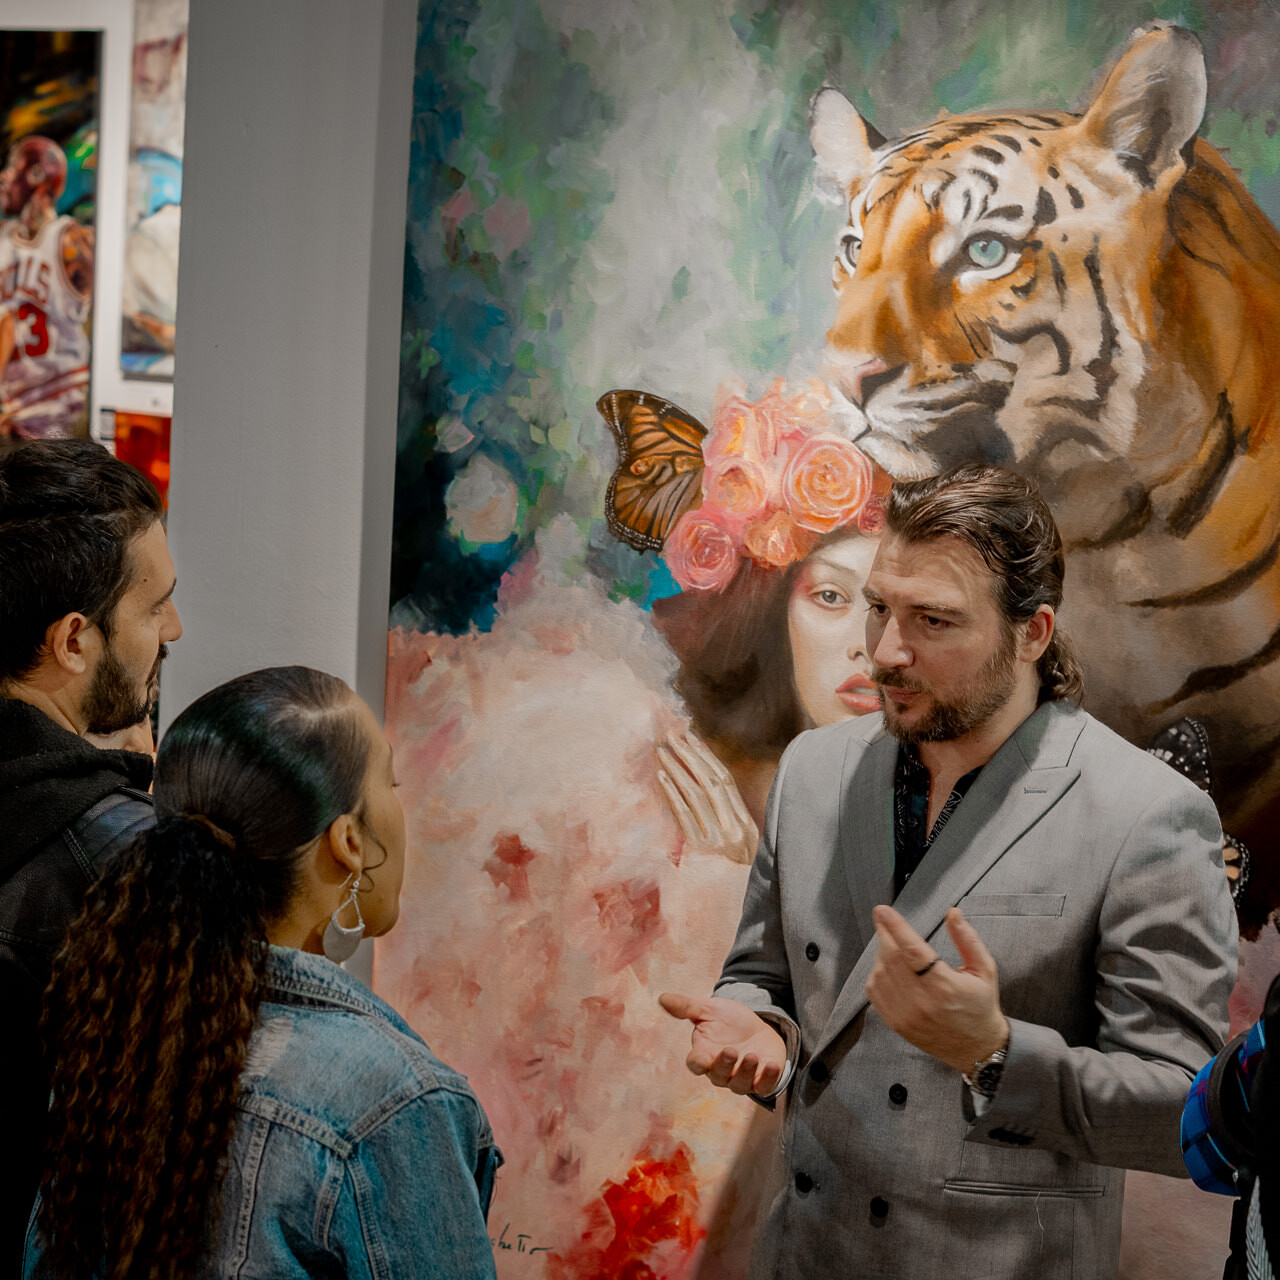 Alex Righetto gesturing while talking to fairgoers about his artwork 'The Guardian' at the Spectrum Miami art fair.